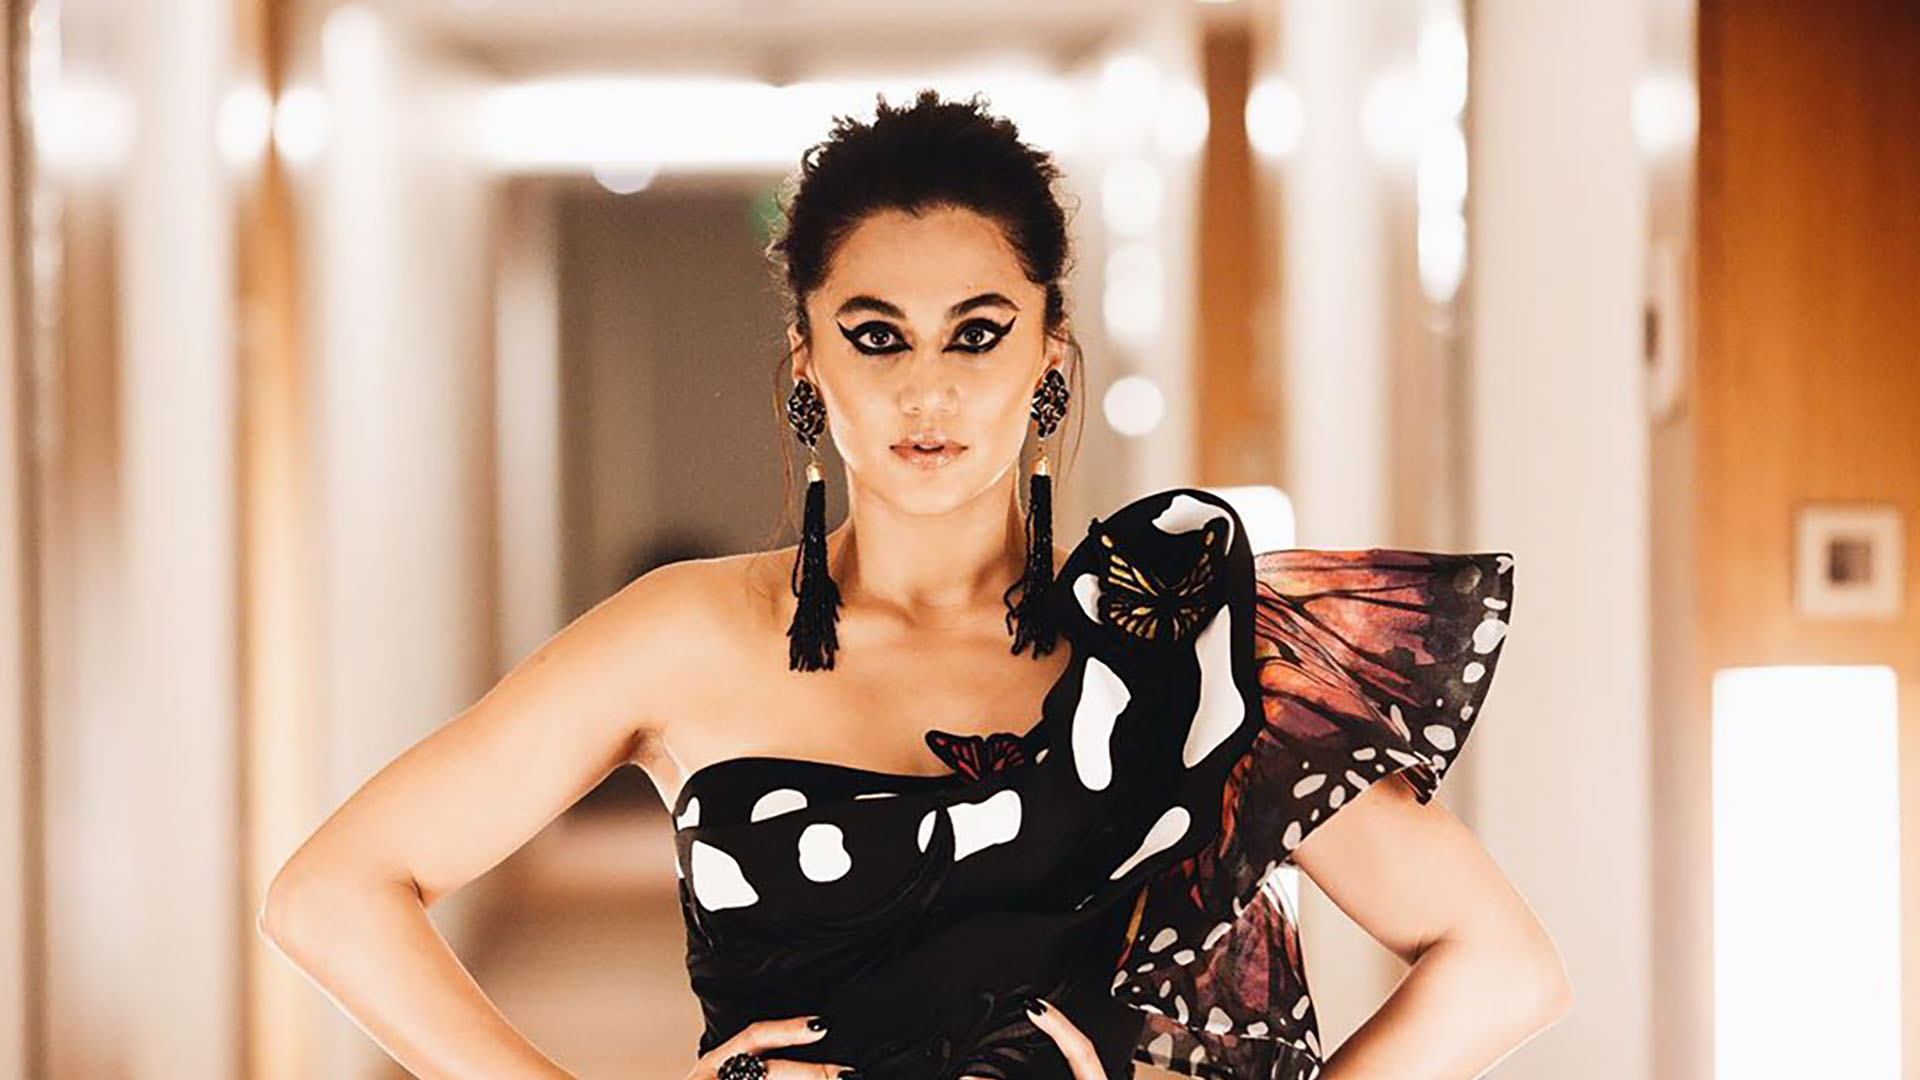 Taapsee Pannu hd photos 4K wallpaper for Free Download - Live Cinema News